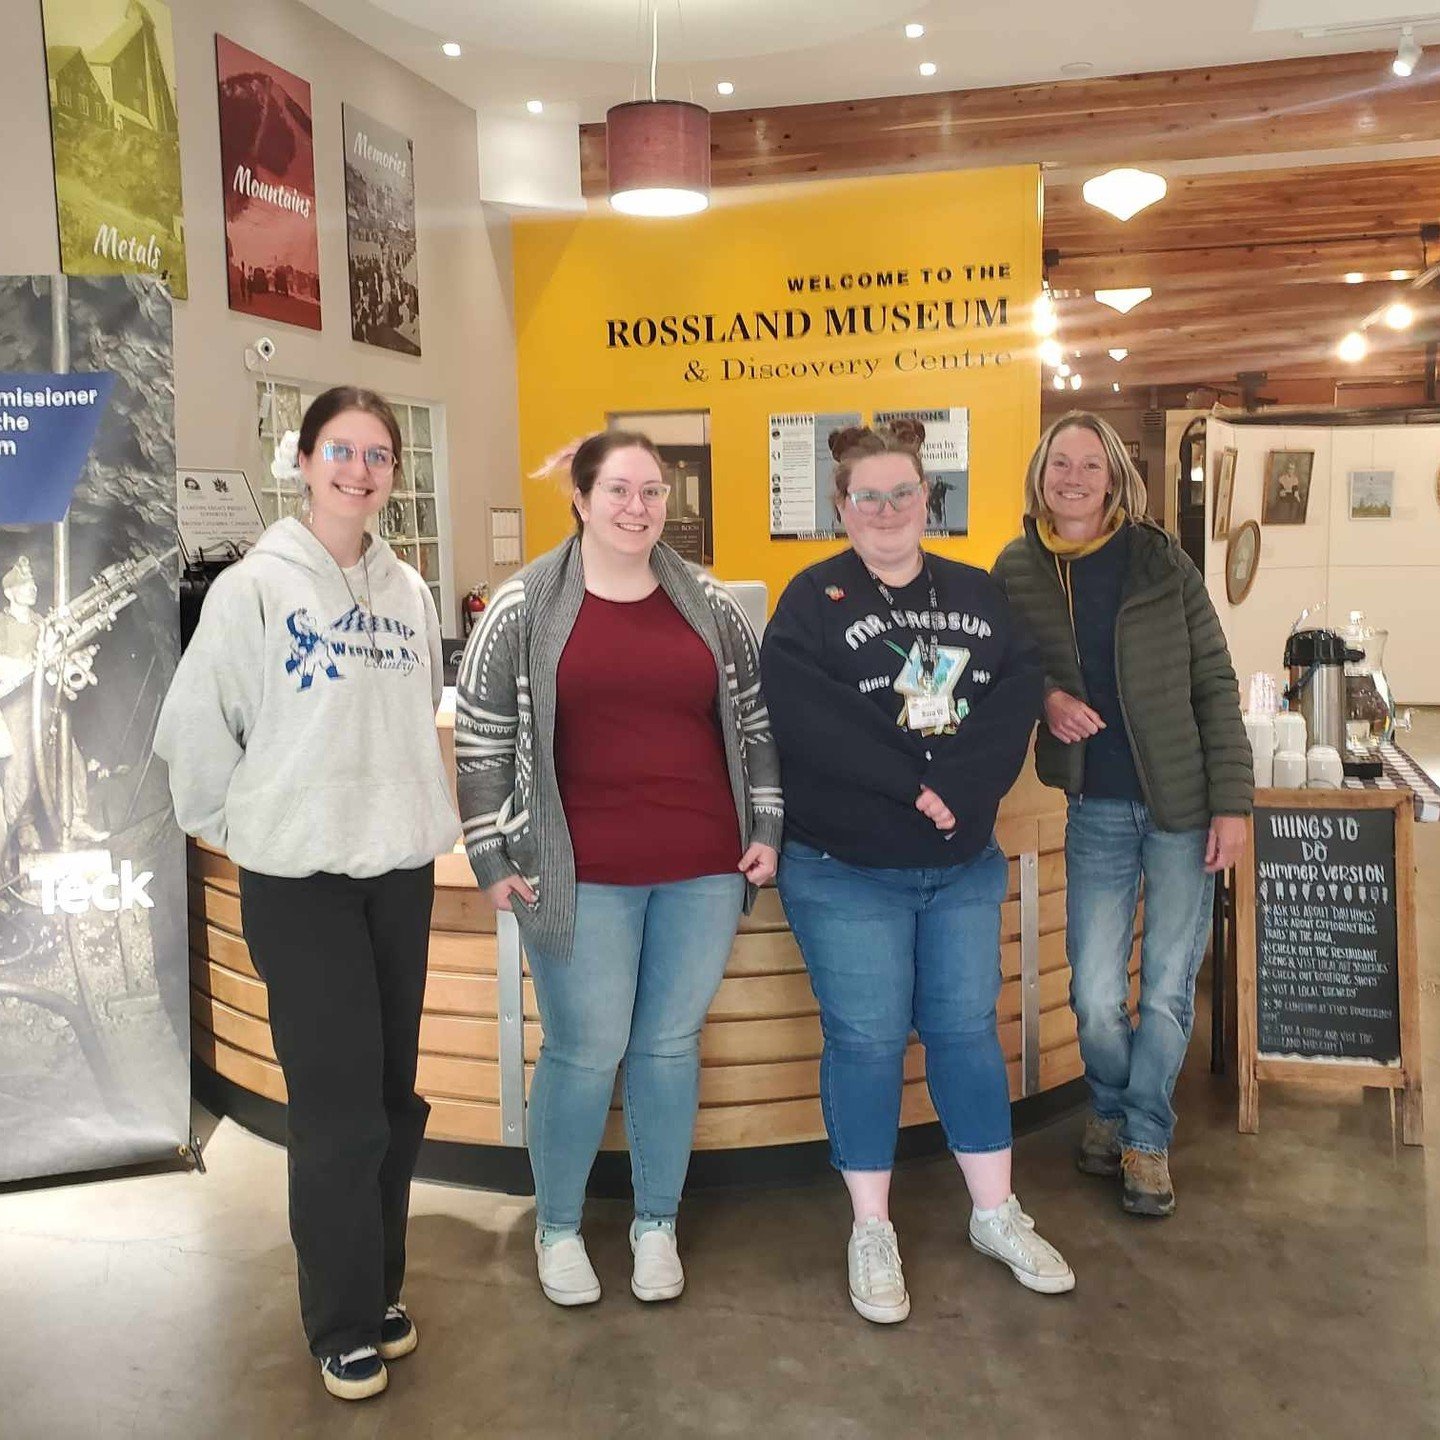 Over the weekend, museum administrator Hannah accepted the BC Museum Week challenge to visit another museum in BC. Thank you so much to @rosslandmuseum staff Elena, Sara, and Melanie for welcoming her and showing her around your fantastic museum! It'